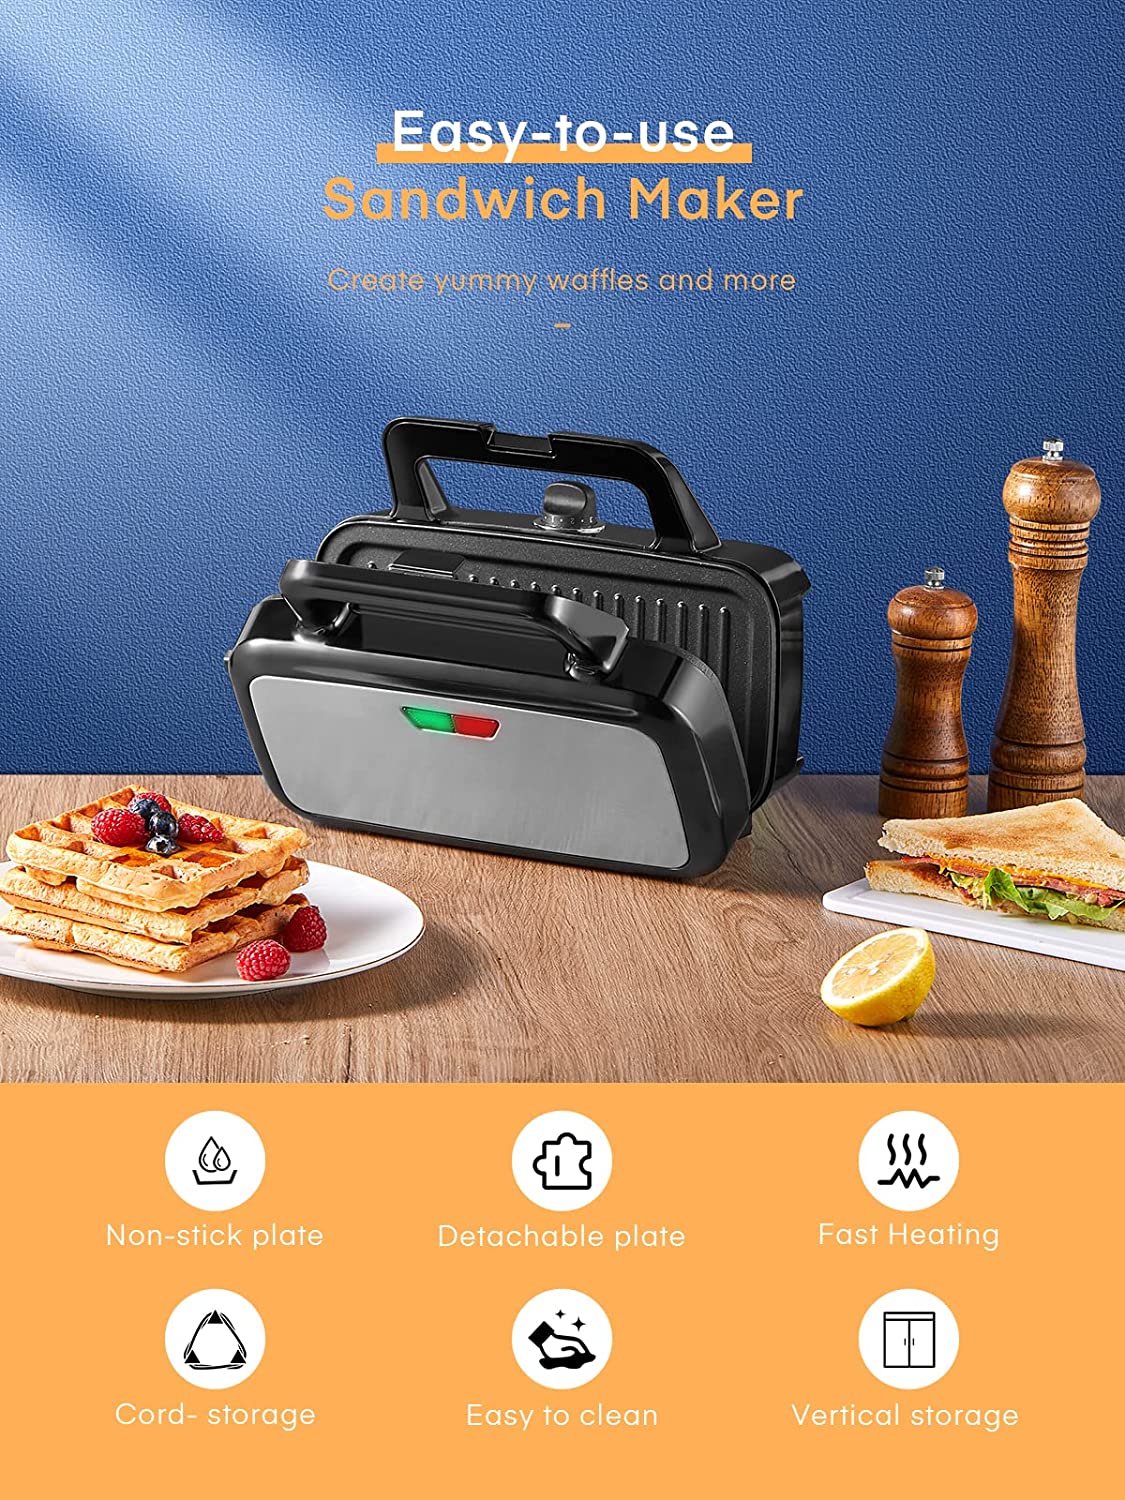 easy to use, HOUSNAT 3 in 1 Sandwich Maker, Waffle Maker with Removable Plates, 1200W Panini Press with Interchangeable Non-Stick Plates, Indicator Lights, 5-gear Temperature Control, Silver/Black